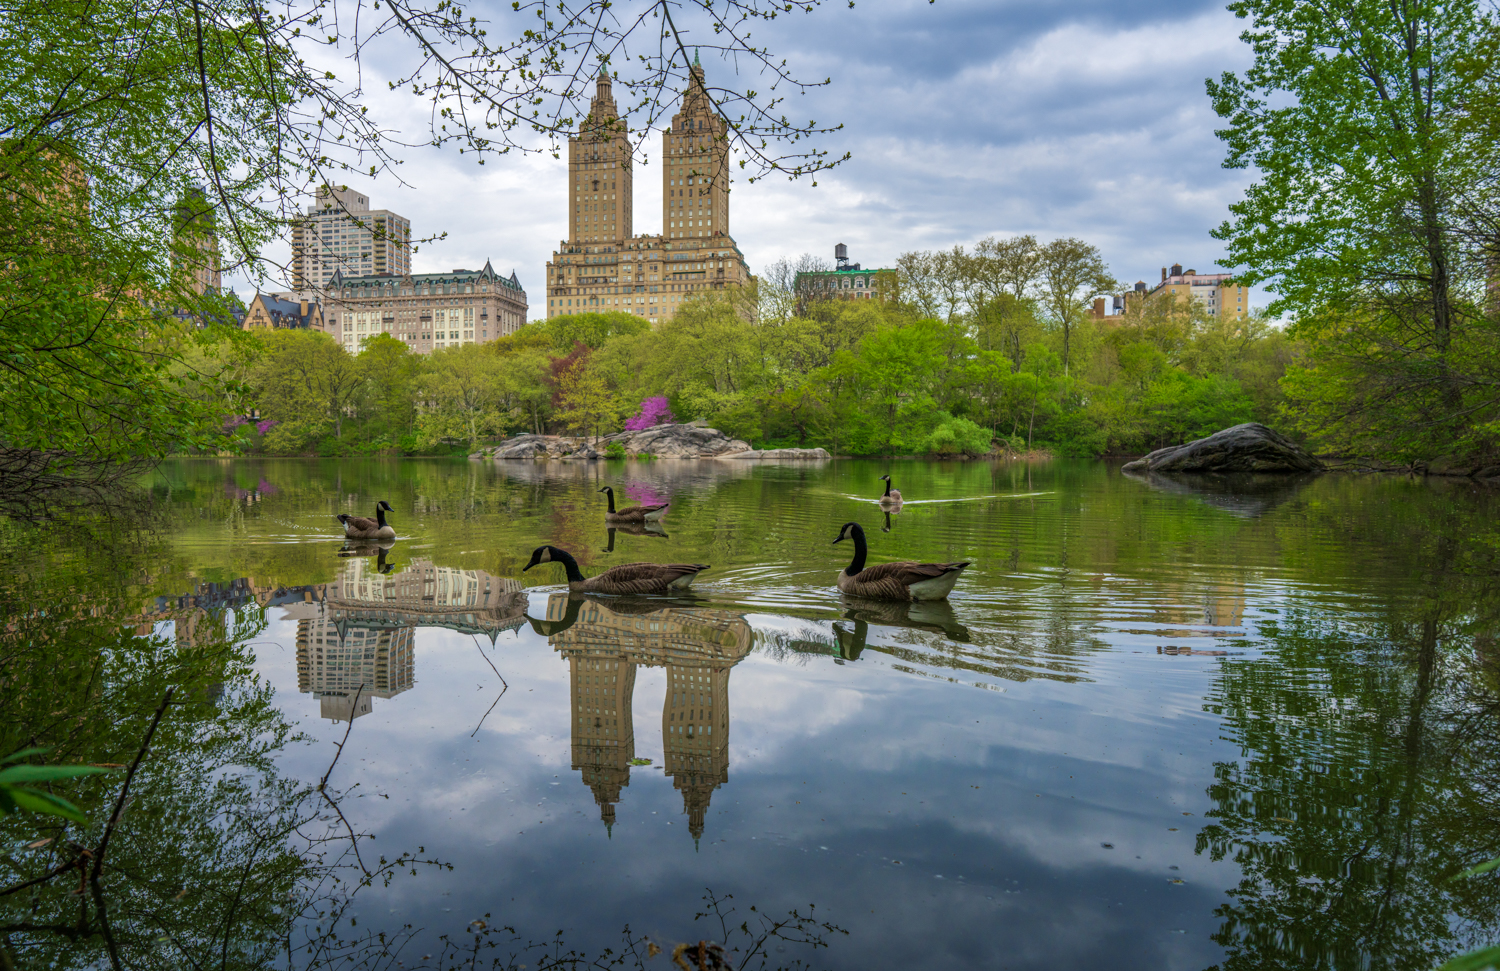 Amidst the budding trees, the pond in Central Park captures the essence of spring in its waters. With each duck's paddle, ripples...